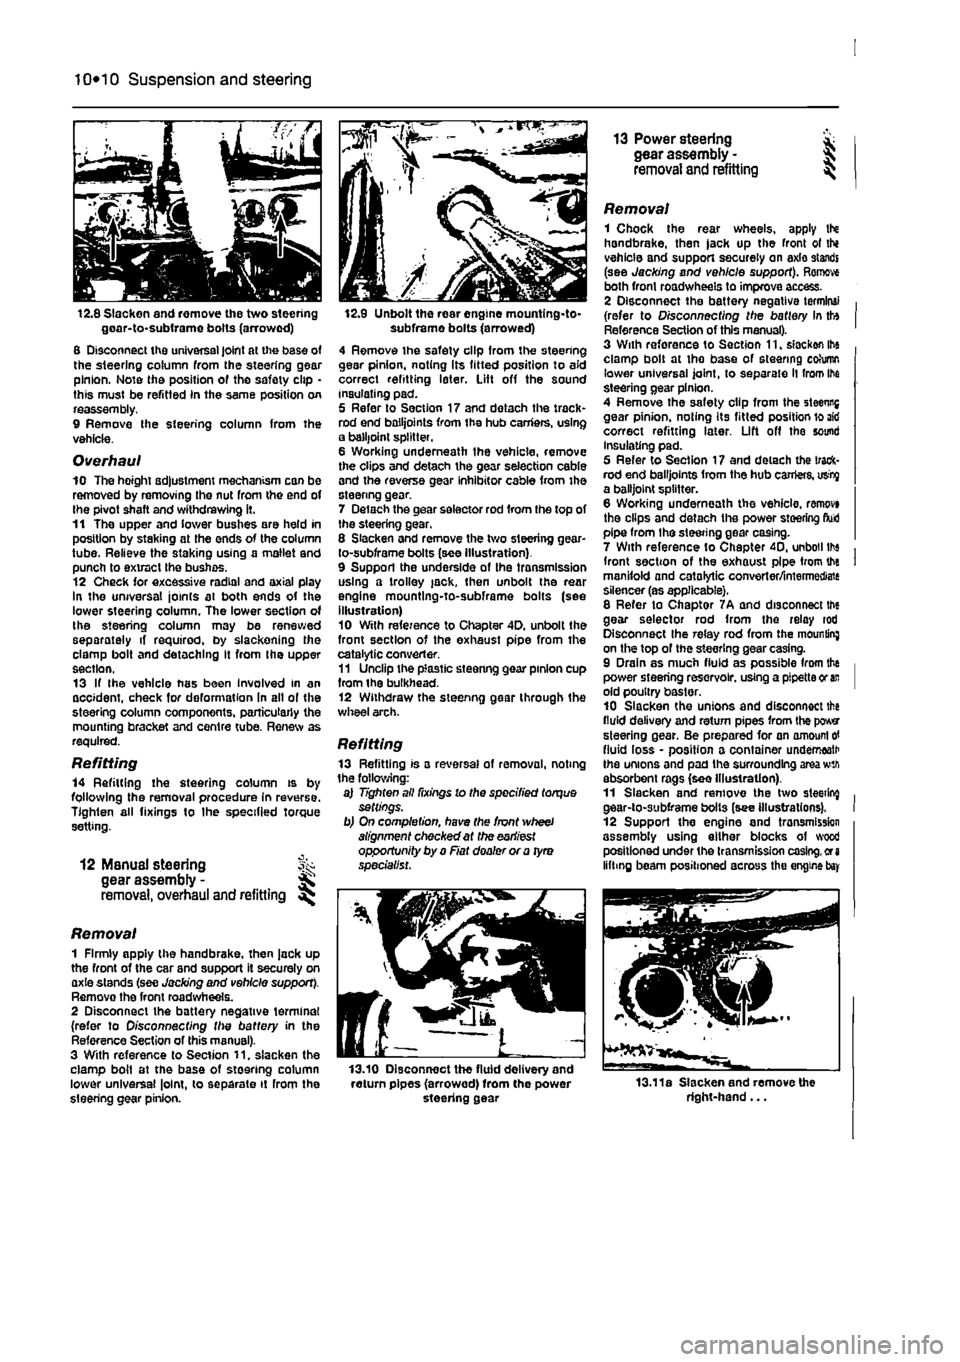 FIAT PUNTO 1994 176 / 1.G Service Manual 
10*10 Suspension and steering 
12.8 Slacken and remove the two steering goar-to-subirame bolts (arrowed) 8 Disconnect the universal joint at the base of the steering column from the steering gear pin